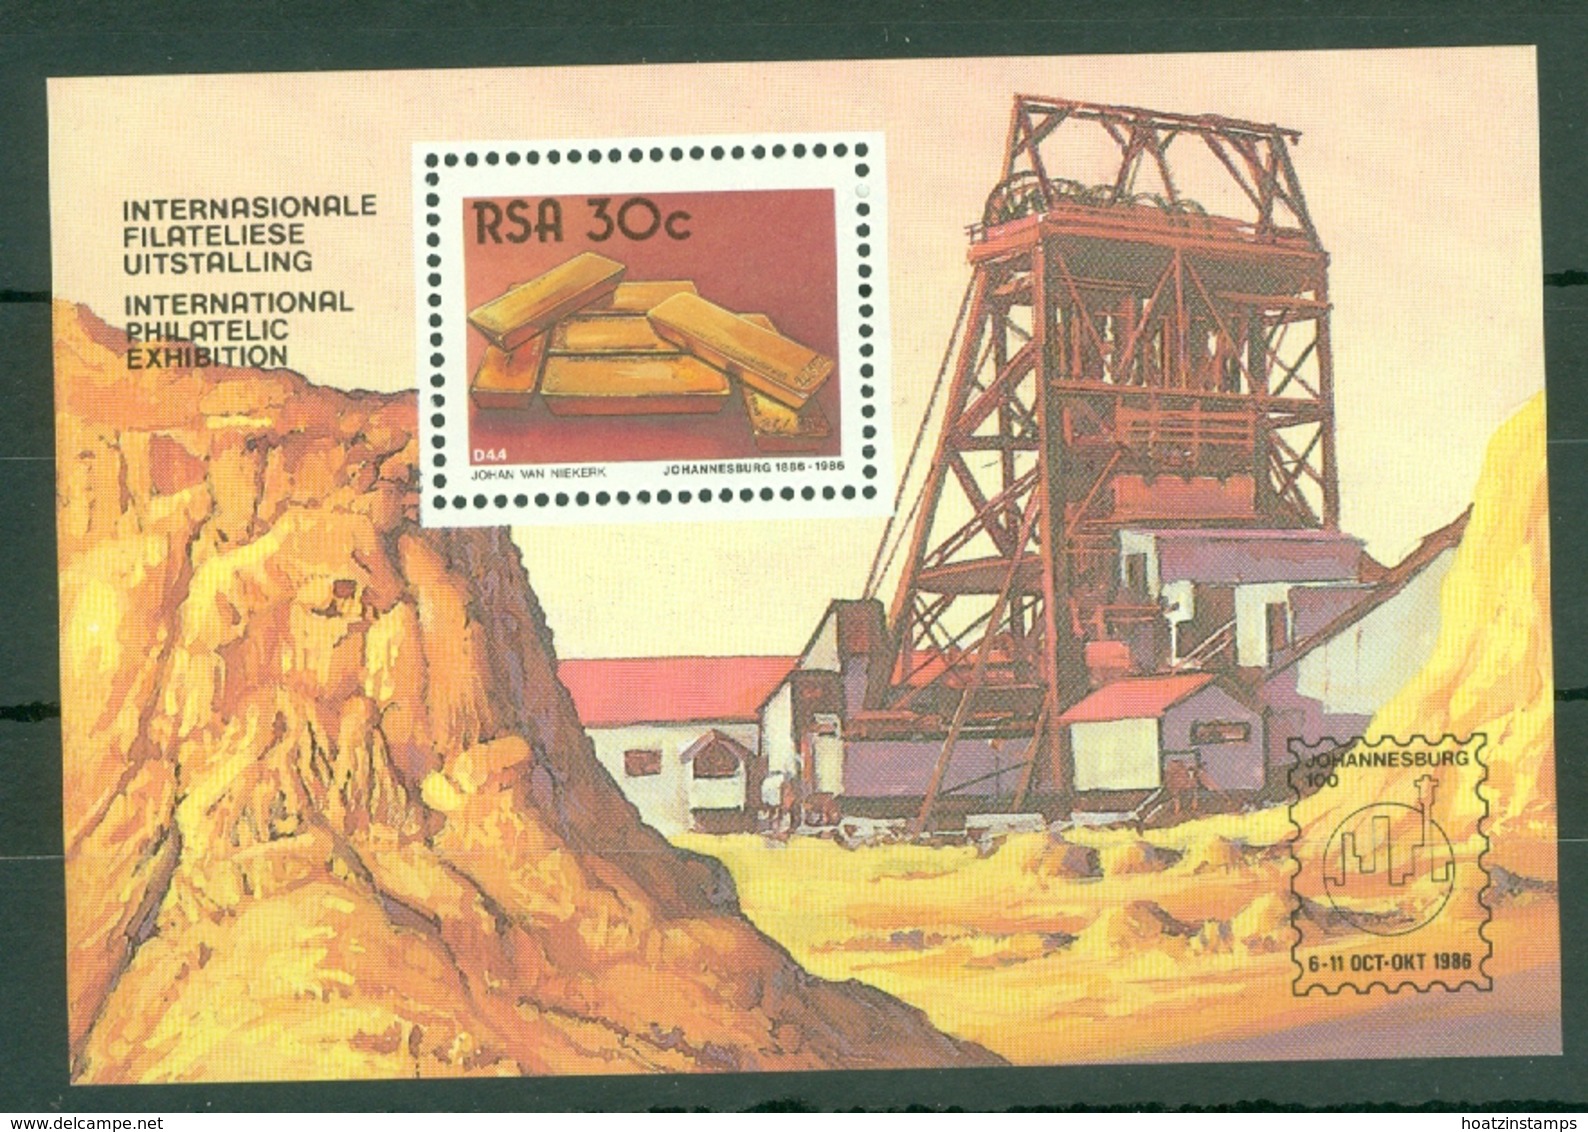 South Africa: 1986   Centenary Of Johannesburg   M/S   MNH - Unused Stamps